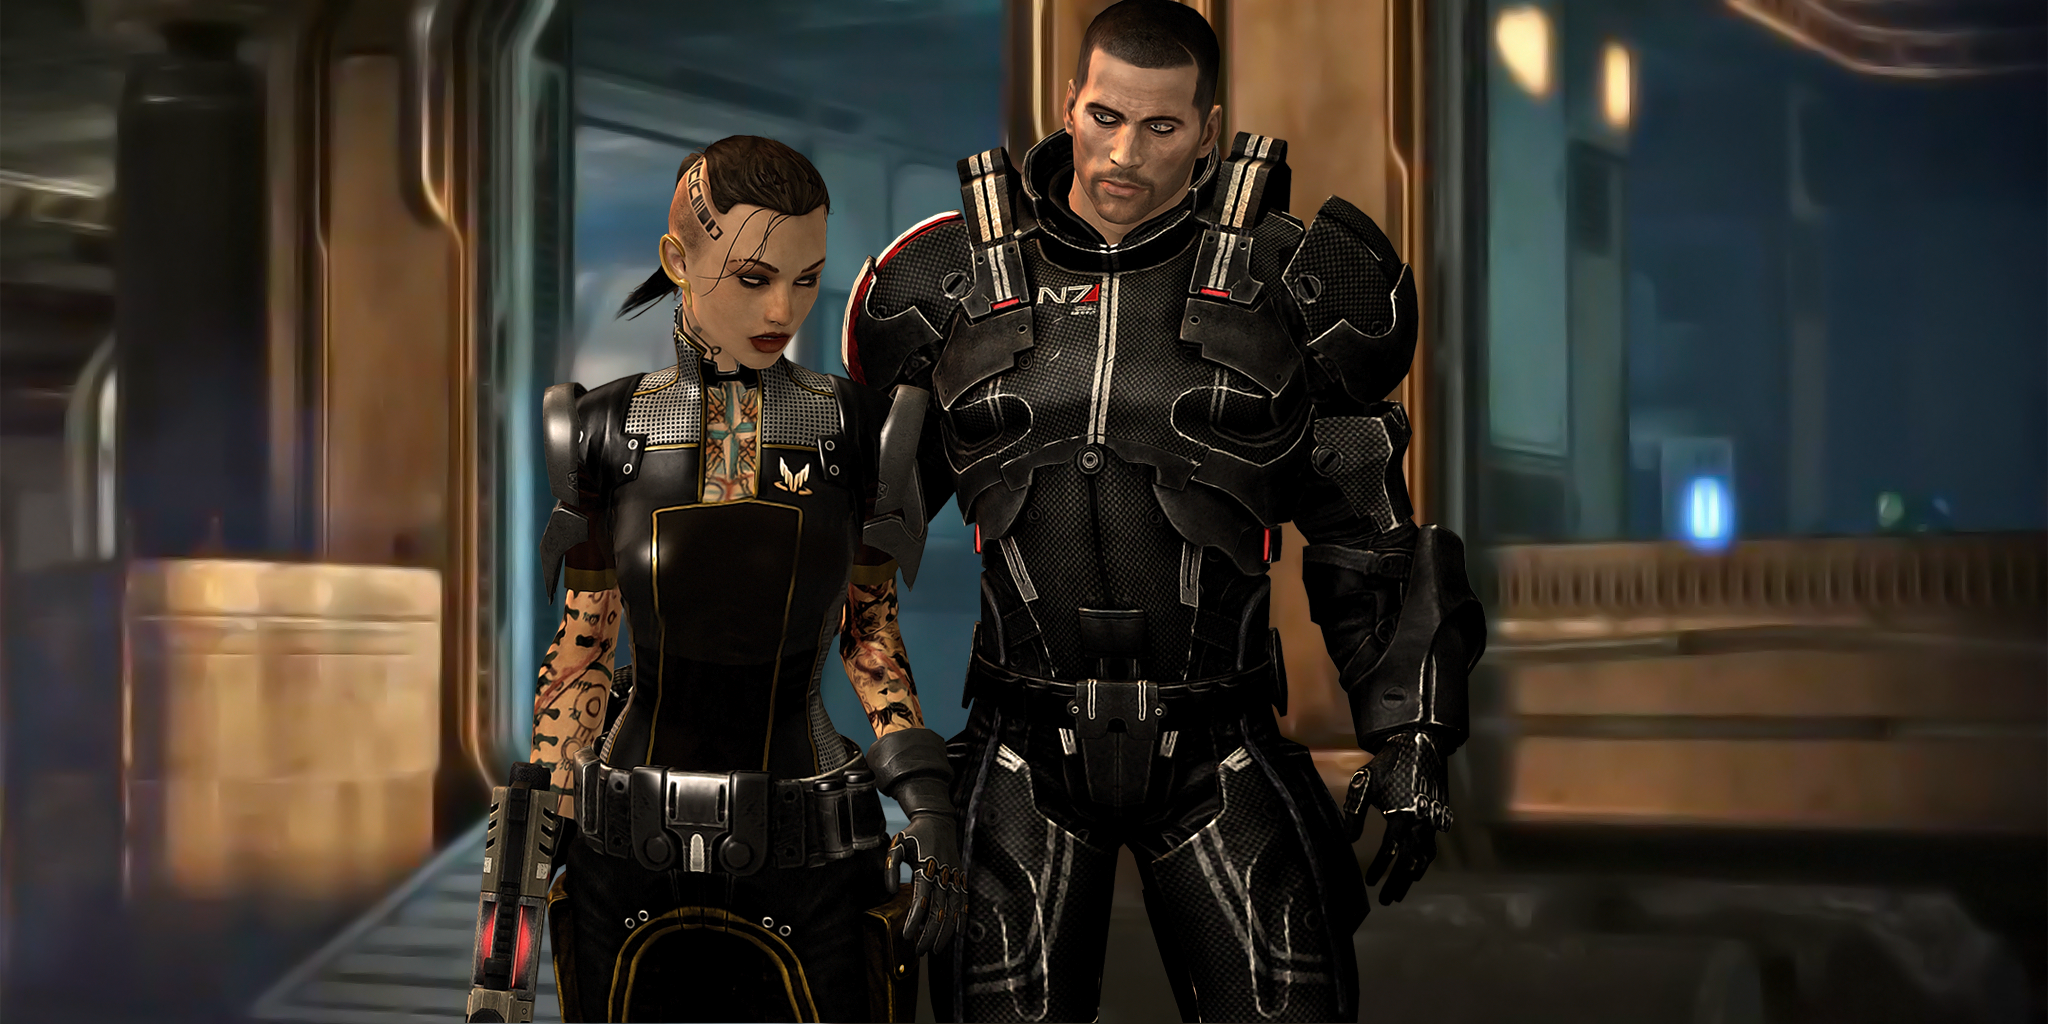 General 2048x1024 Mass Effect Jack (Mass Effect) video games PC gaming CGI science fiction women Science Fiction Men video game men video game girls science fiction